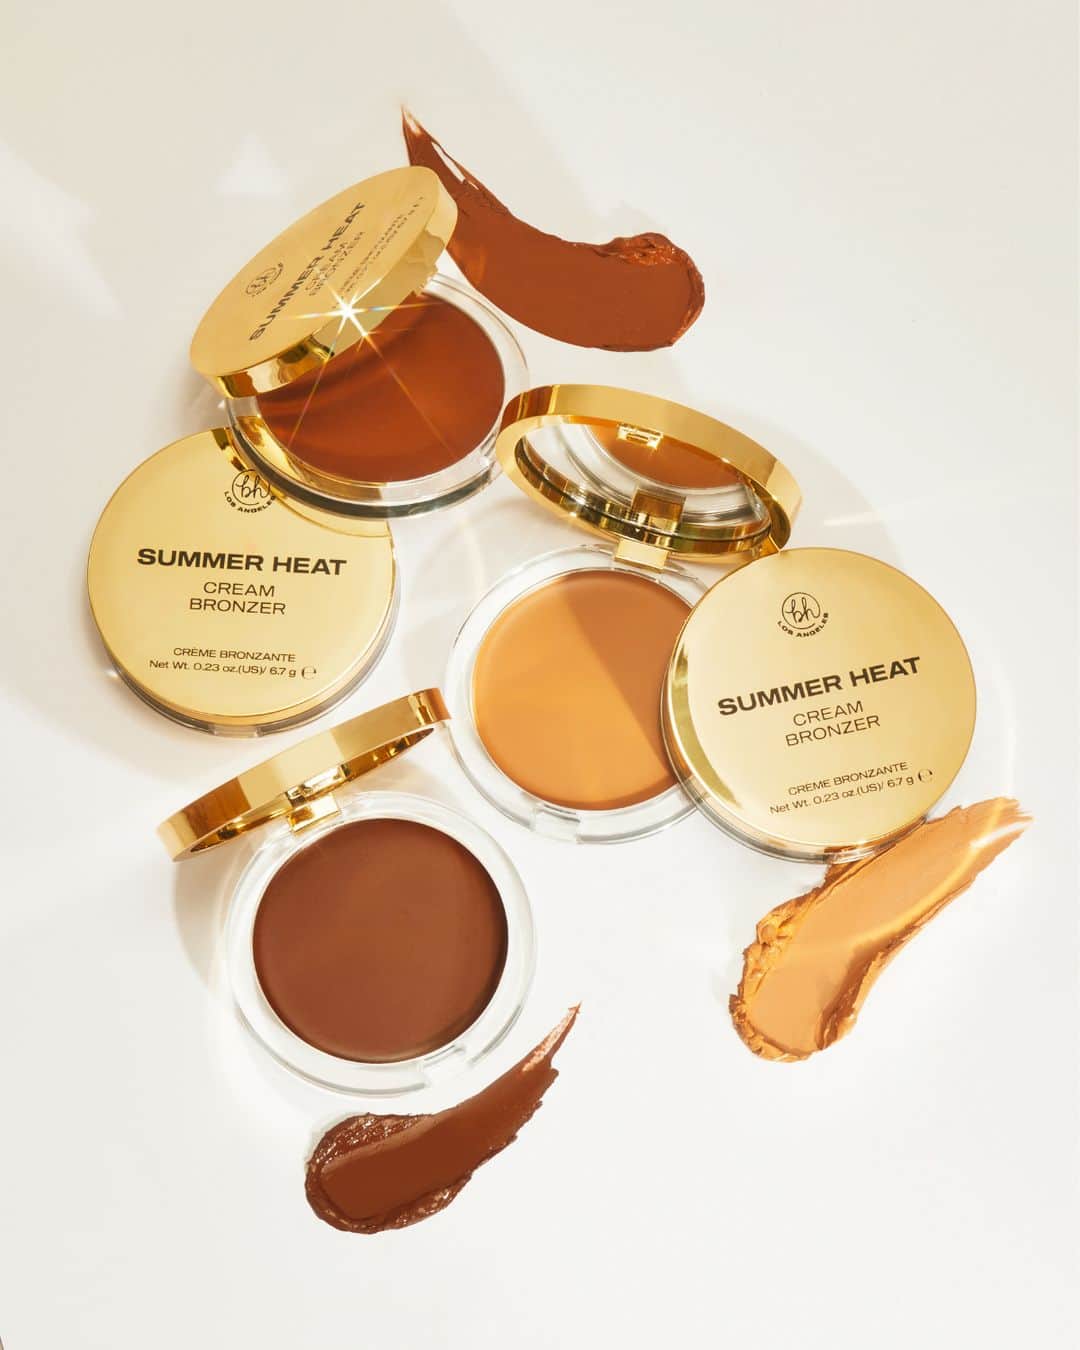 BH Cosmeticsのインスタグラム：「Get that sun-soaked, post-beach glow all year round with our *new* SUMMER HEAT Cream Bronzers 🏖️☀️ Weightless, soft cream formula delivers the most dewy bronzed finish of your dreams 💭 Leave a 😍 in the comments if you're swipin' on sun-kissed radiance 👇⁣ ⁣ ☀️ Available in 3 shades⁣ ☀️ Soft dewy, bronzed finish⁣ ☀️ Buildable and blendable weightless cream formula⁣ ⁣ Vegan. Cruelty-Free. Clean Ingredients.」